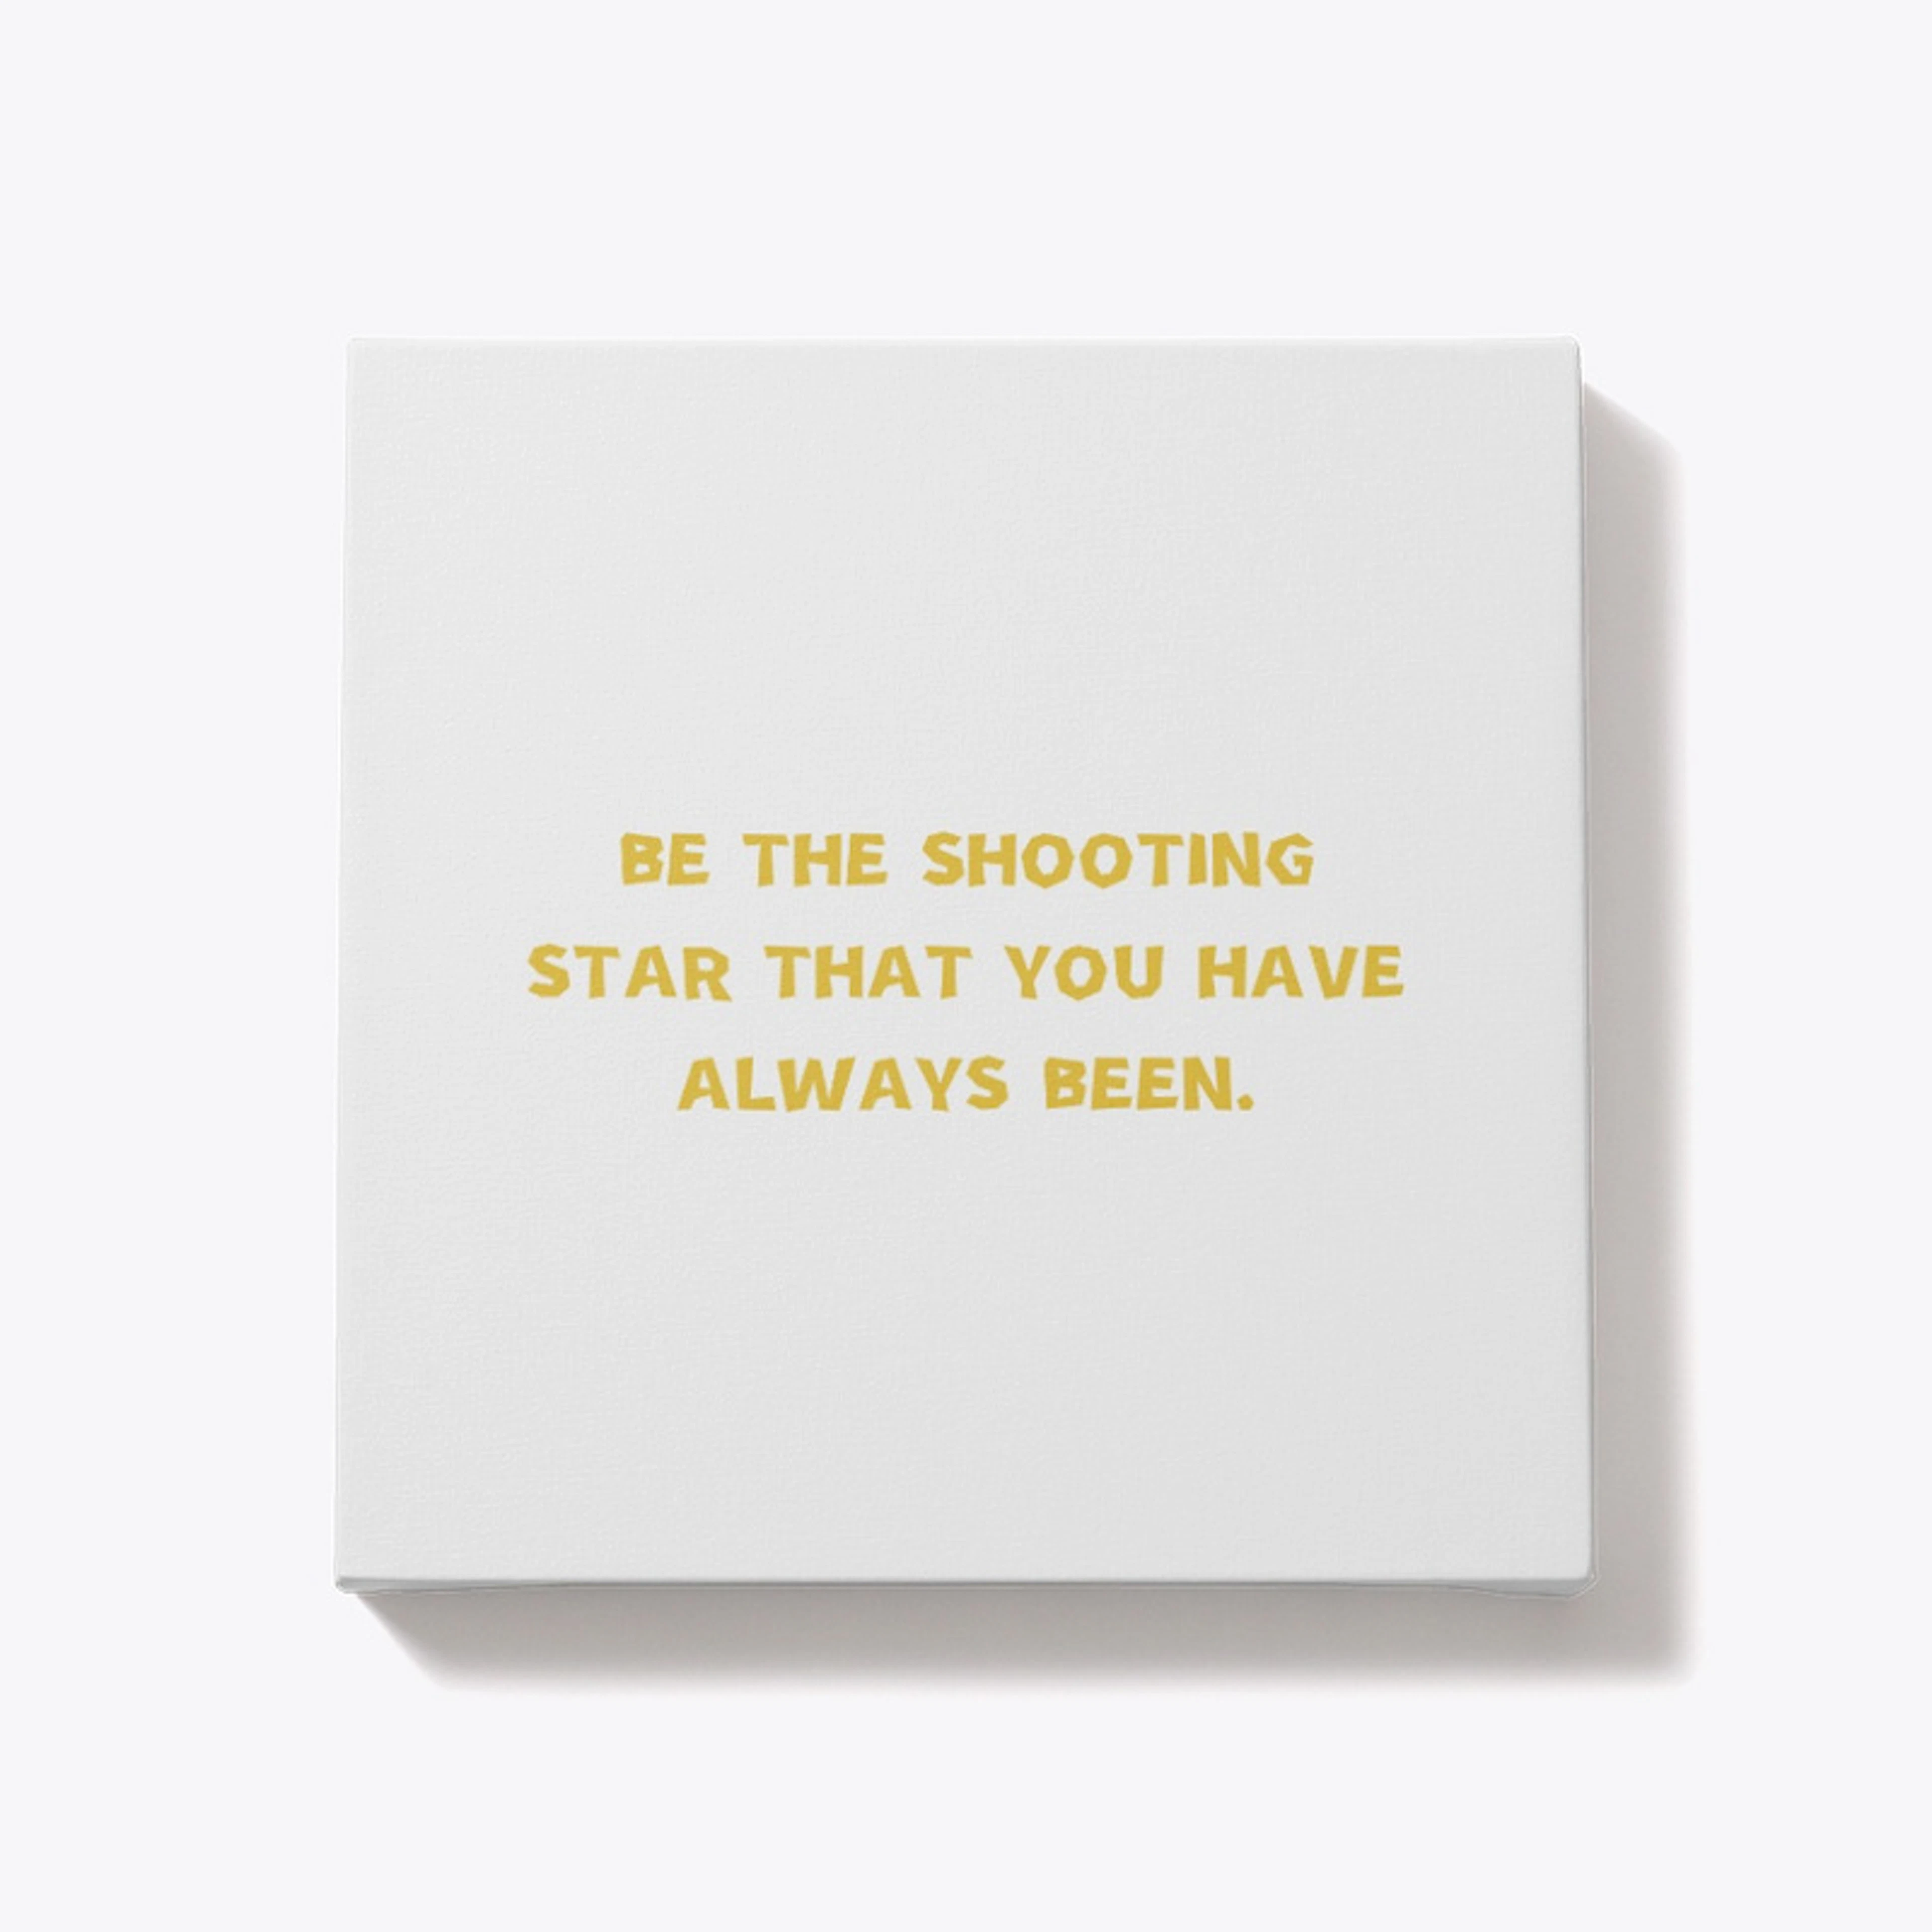 Be the shooting star you've always been